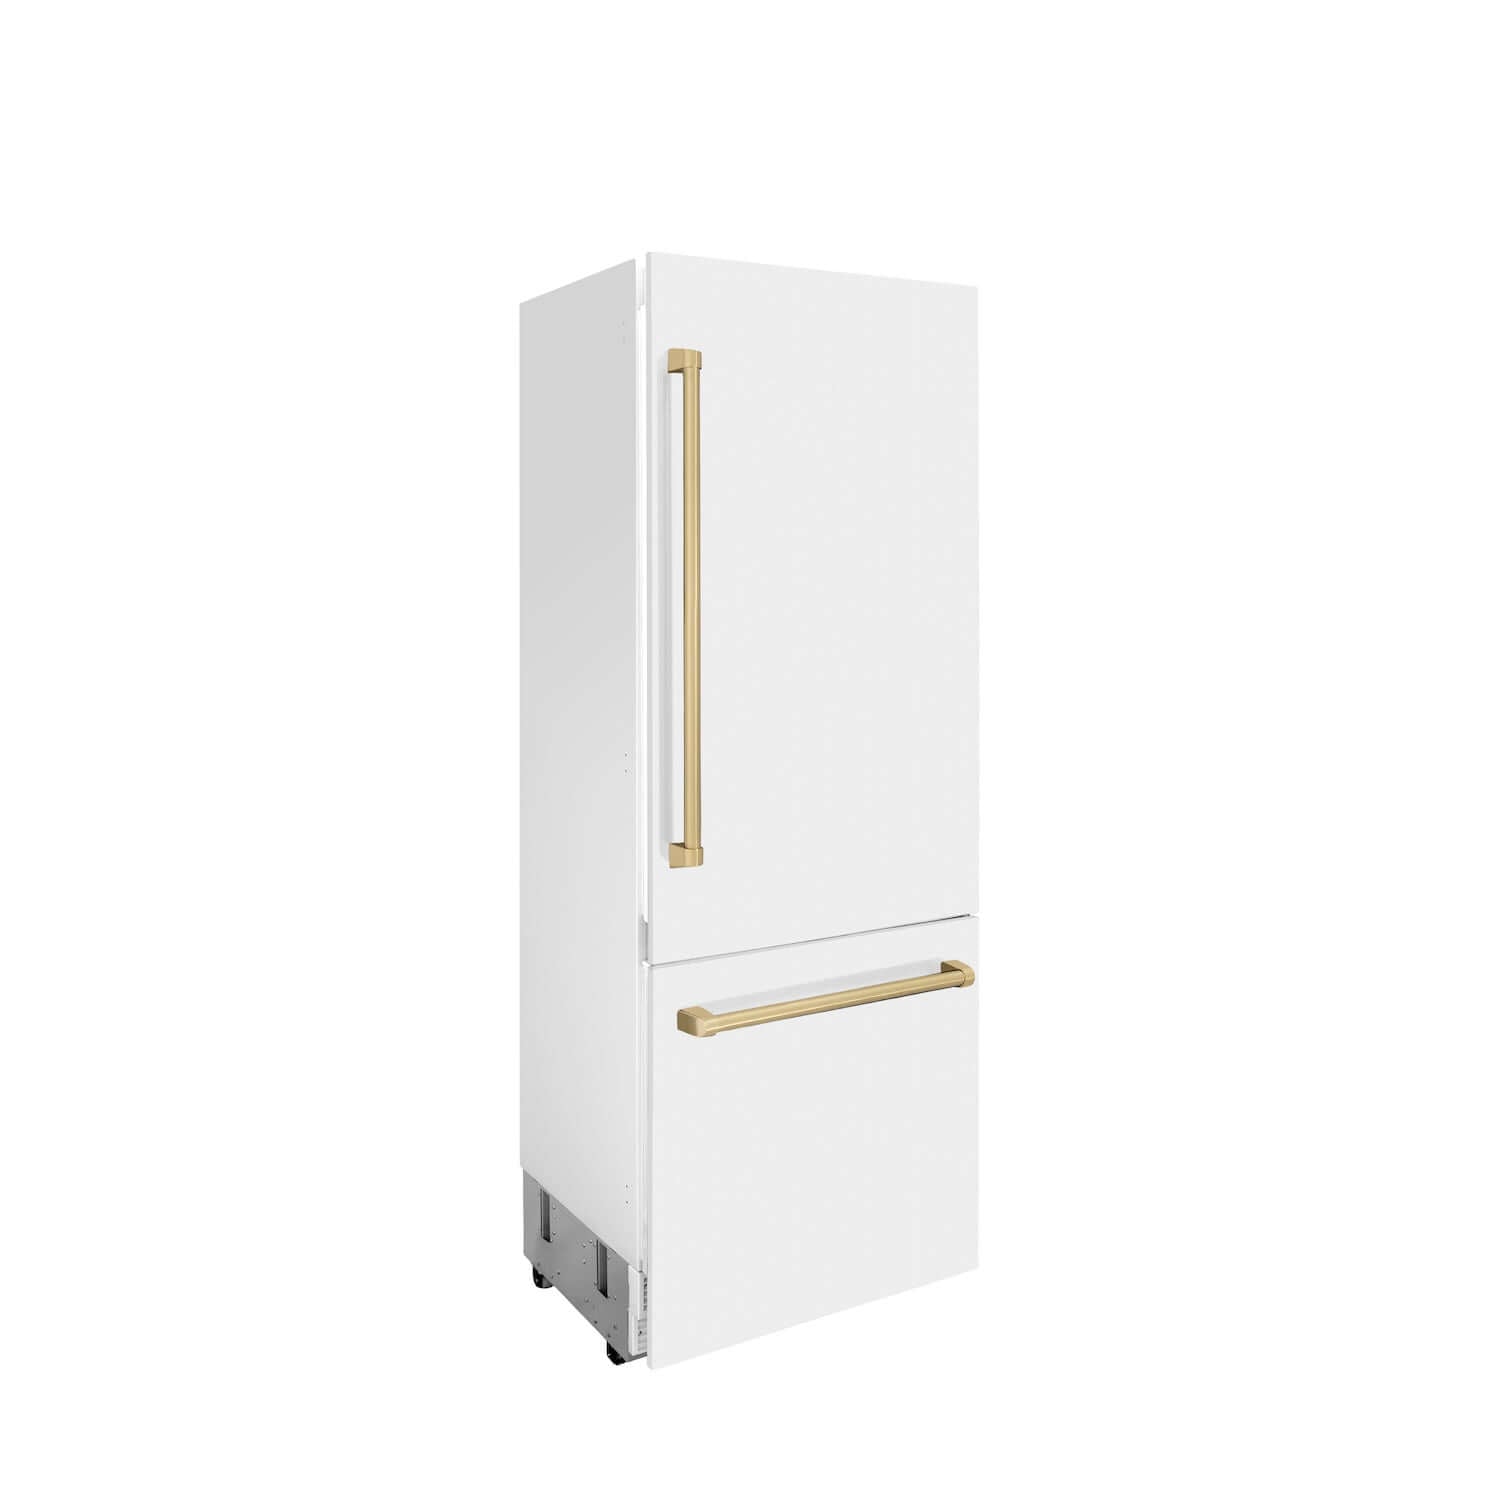 ZLINE 30" Autograph Edition Built-in Refrigerator with White Matte Panels and Accent Handles side.